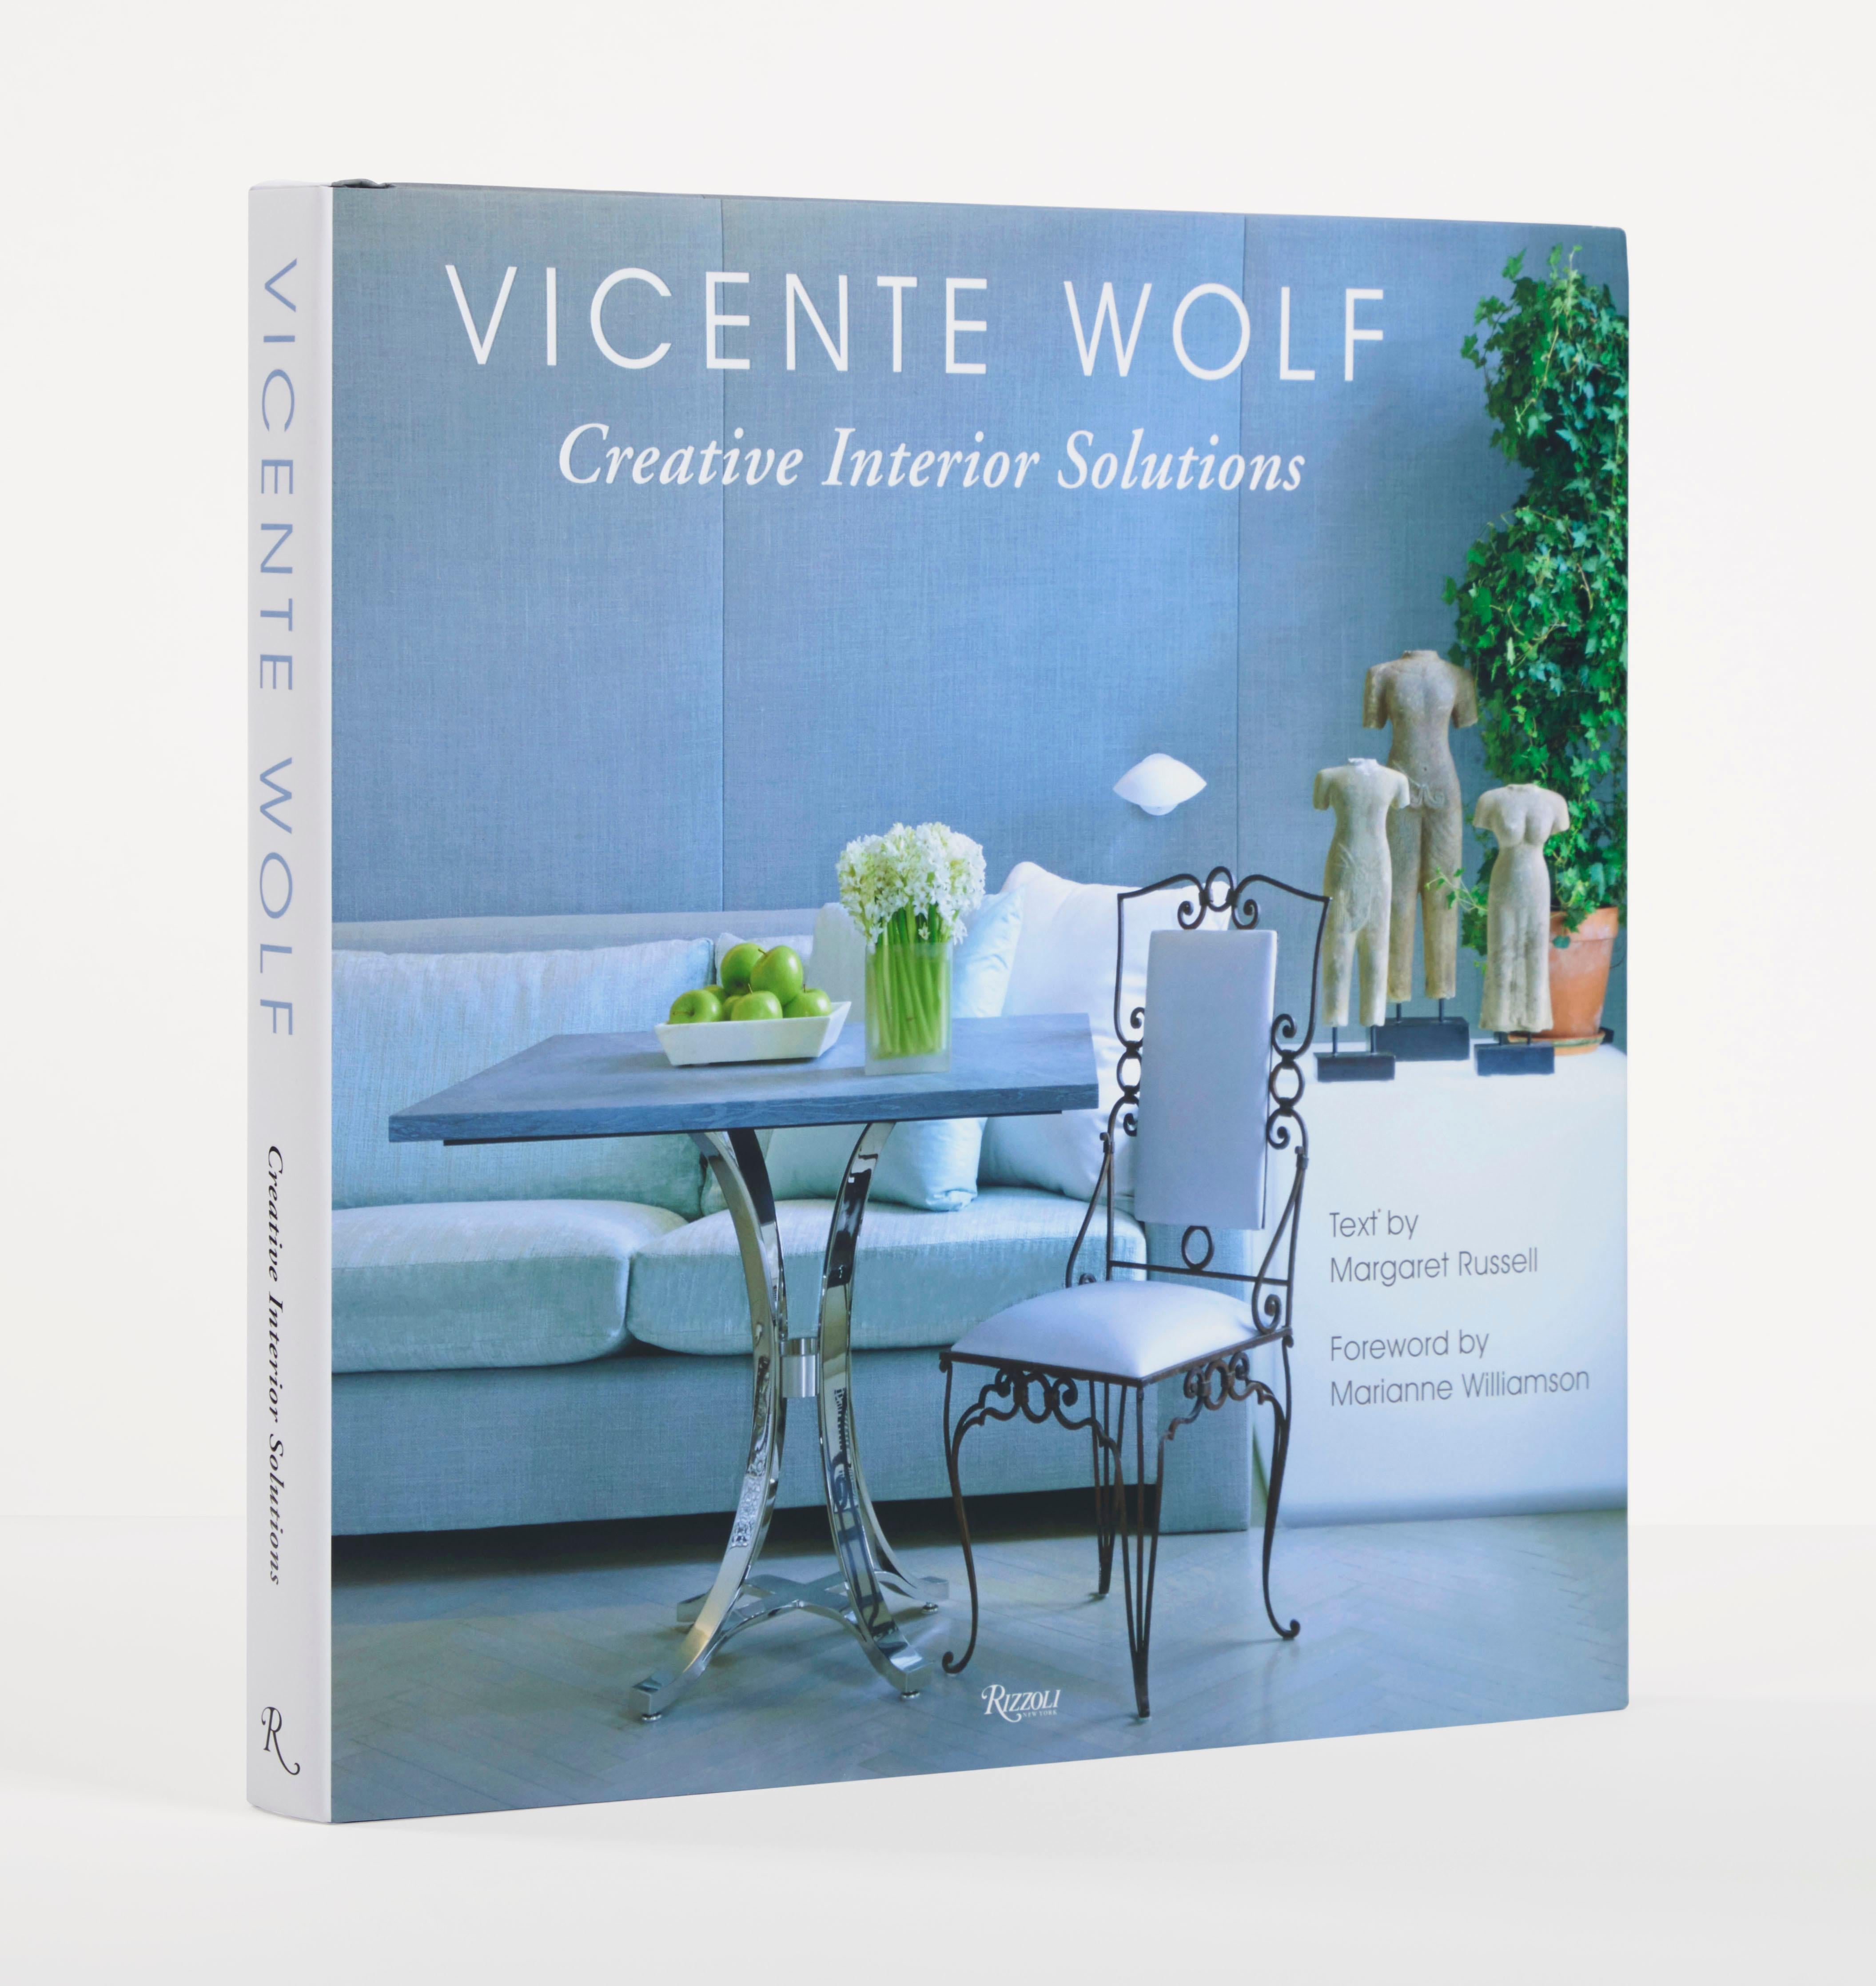 Creative Interior Solutions
Author Vicente Wolf and Margaret Russell, Foreword by Marianne Williamson

Design luminary Vicente Wolf, master of a restrained, elegant, and global aesthetic, distills his decades of experience into an essential guide to